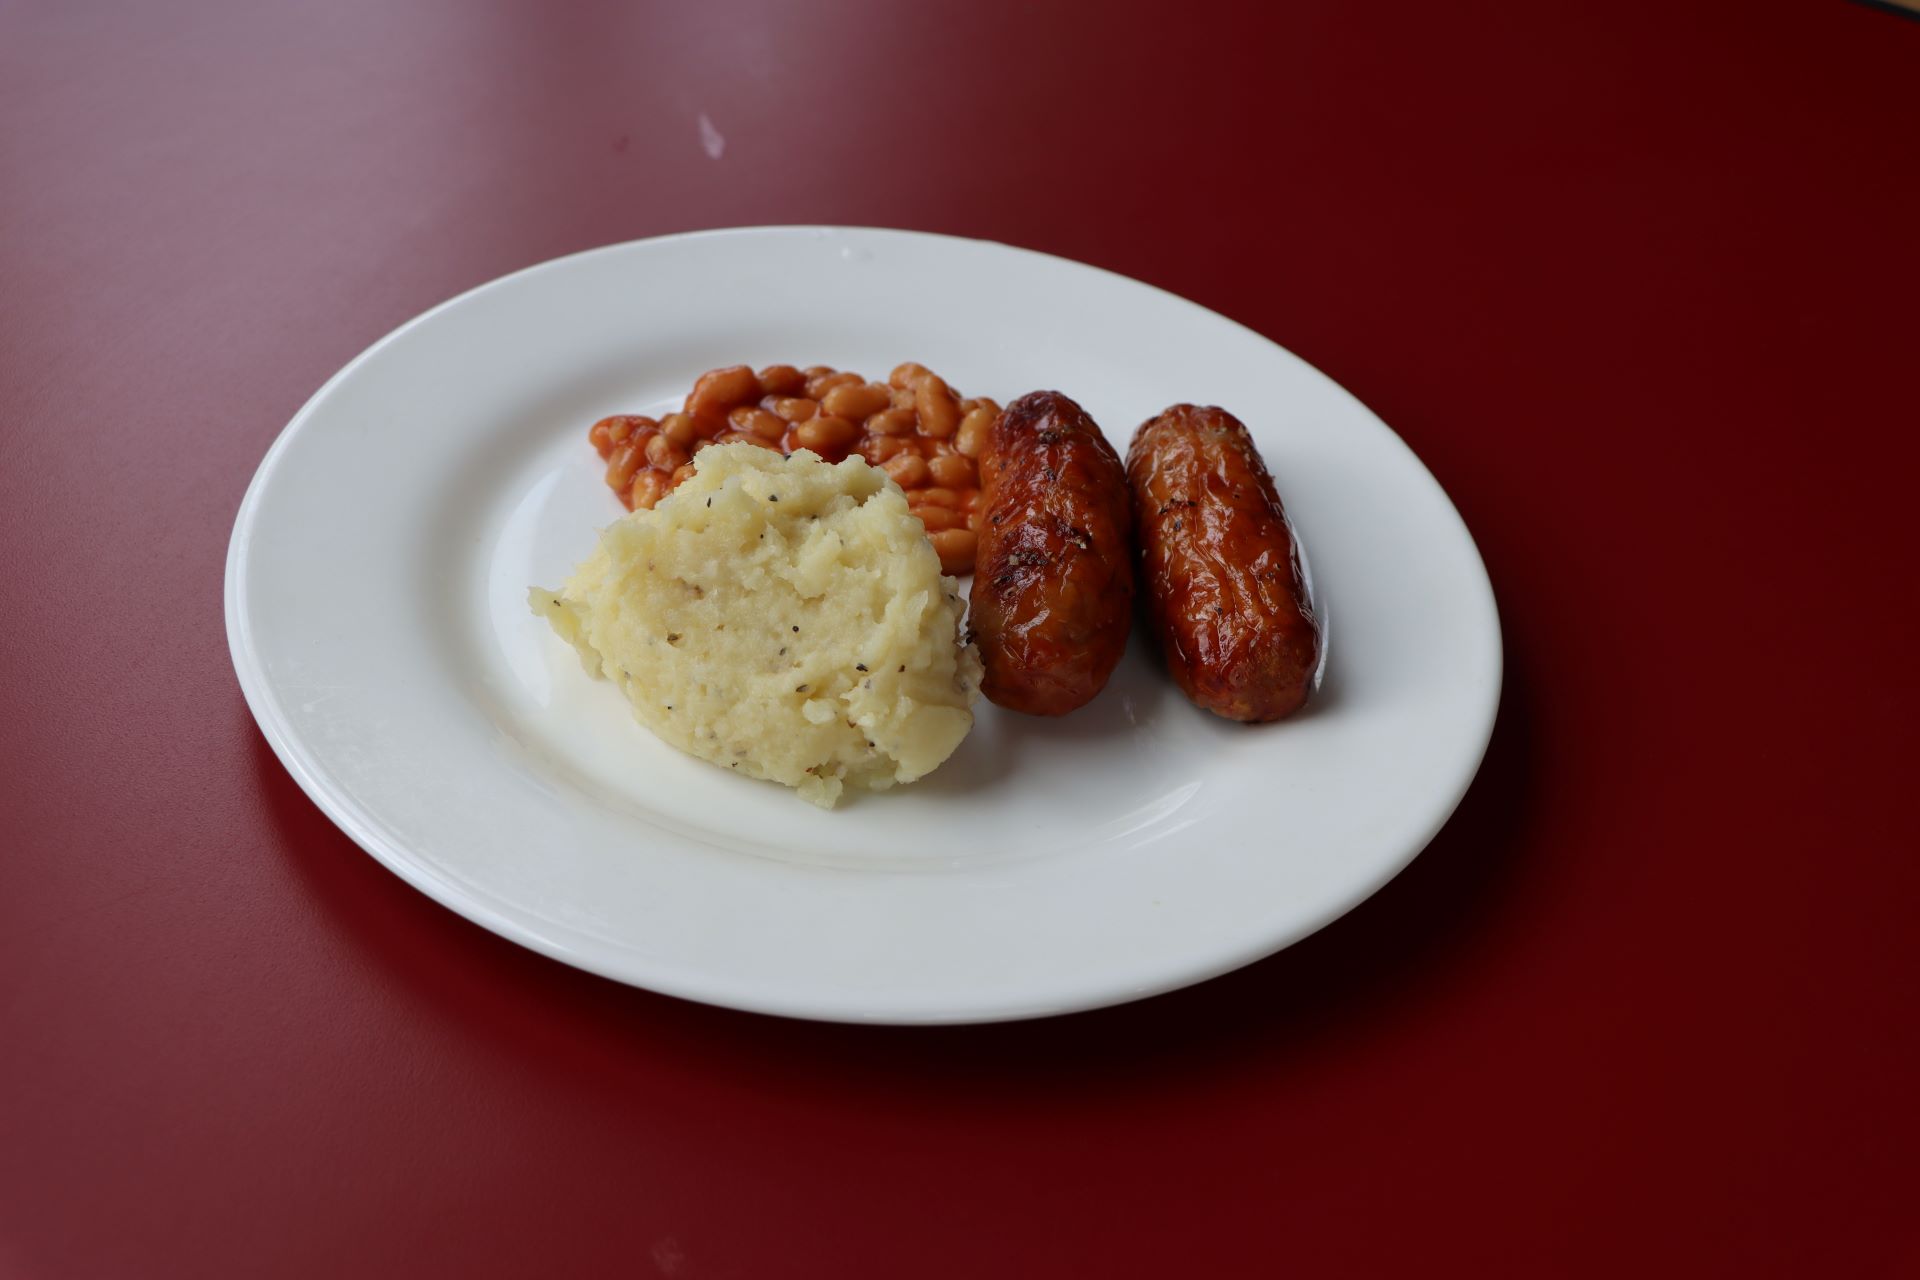 Local Butcher's Sausage with a Creamy Mash and Beans